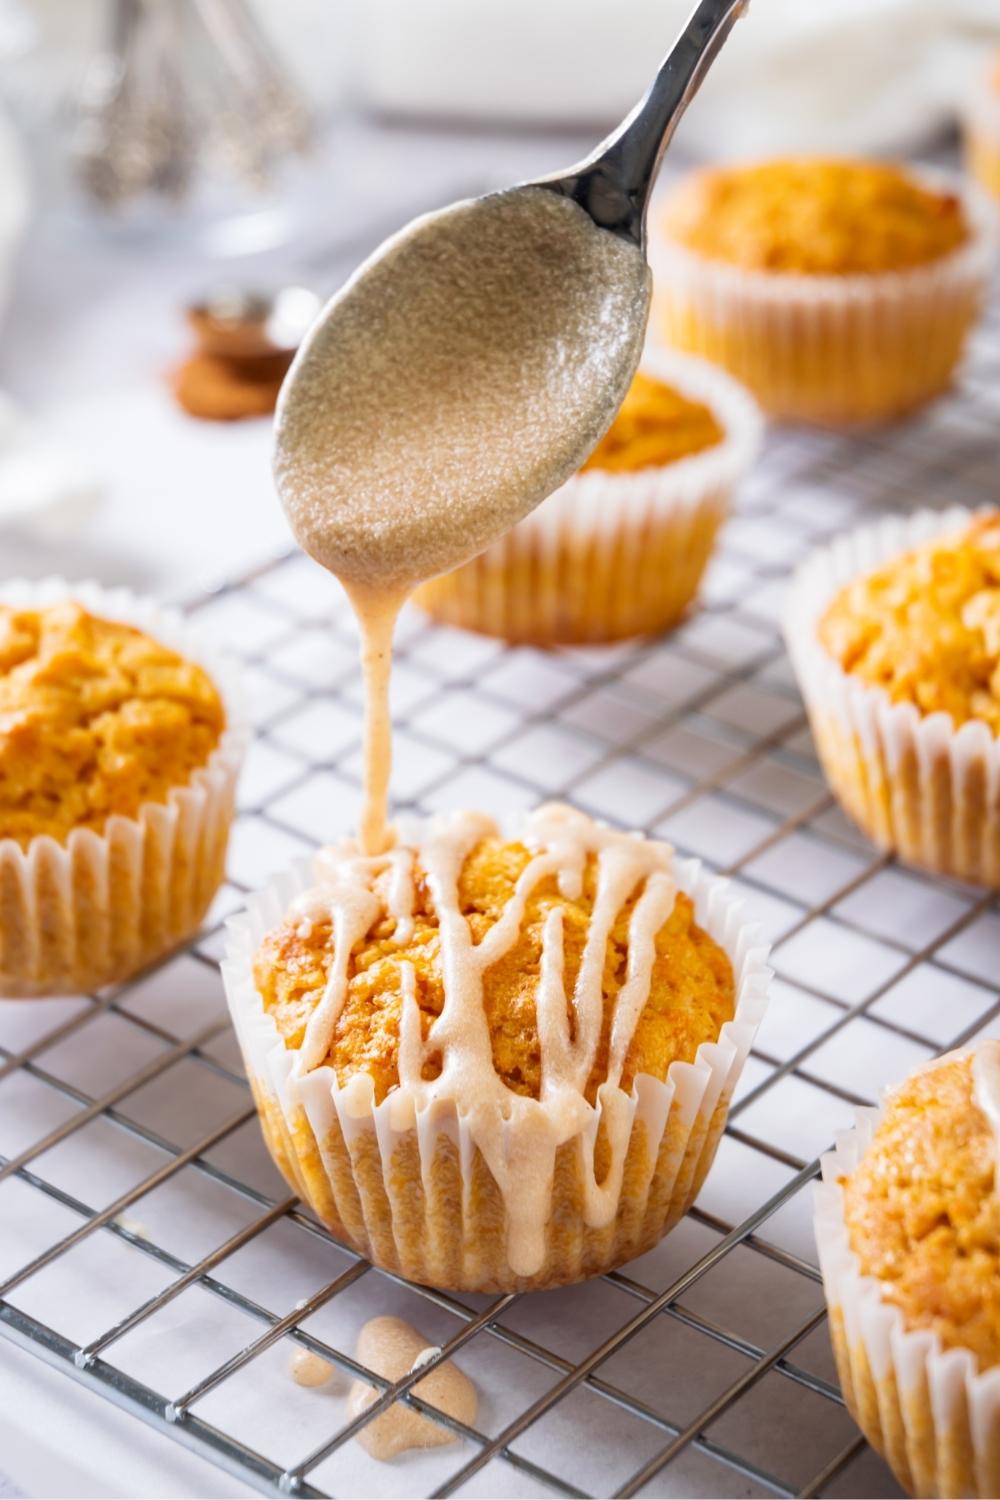 A spoon drizzling cinnamon sugar glaze on top of a sweet potato muffin on a wire rack.